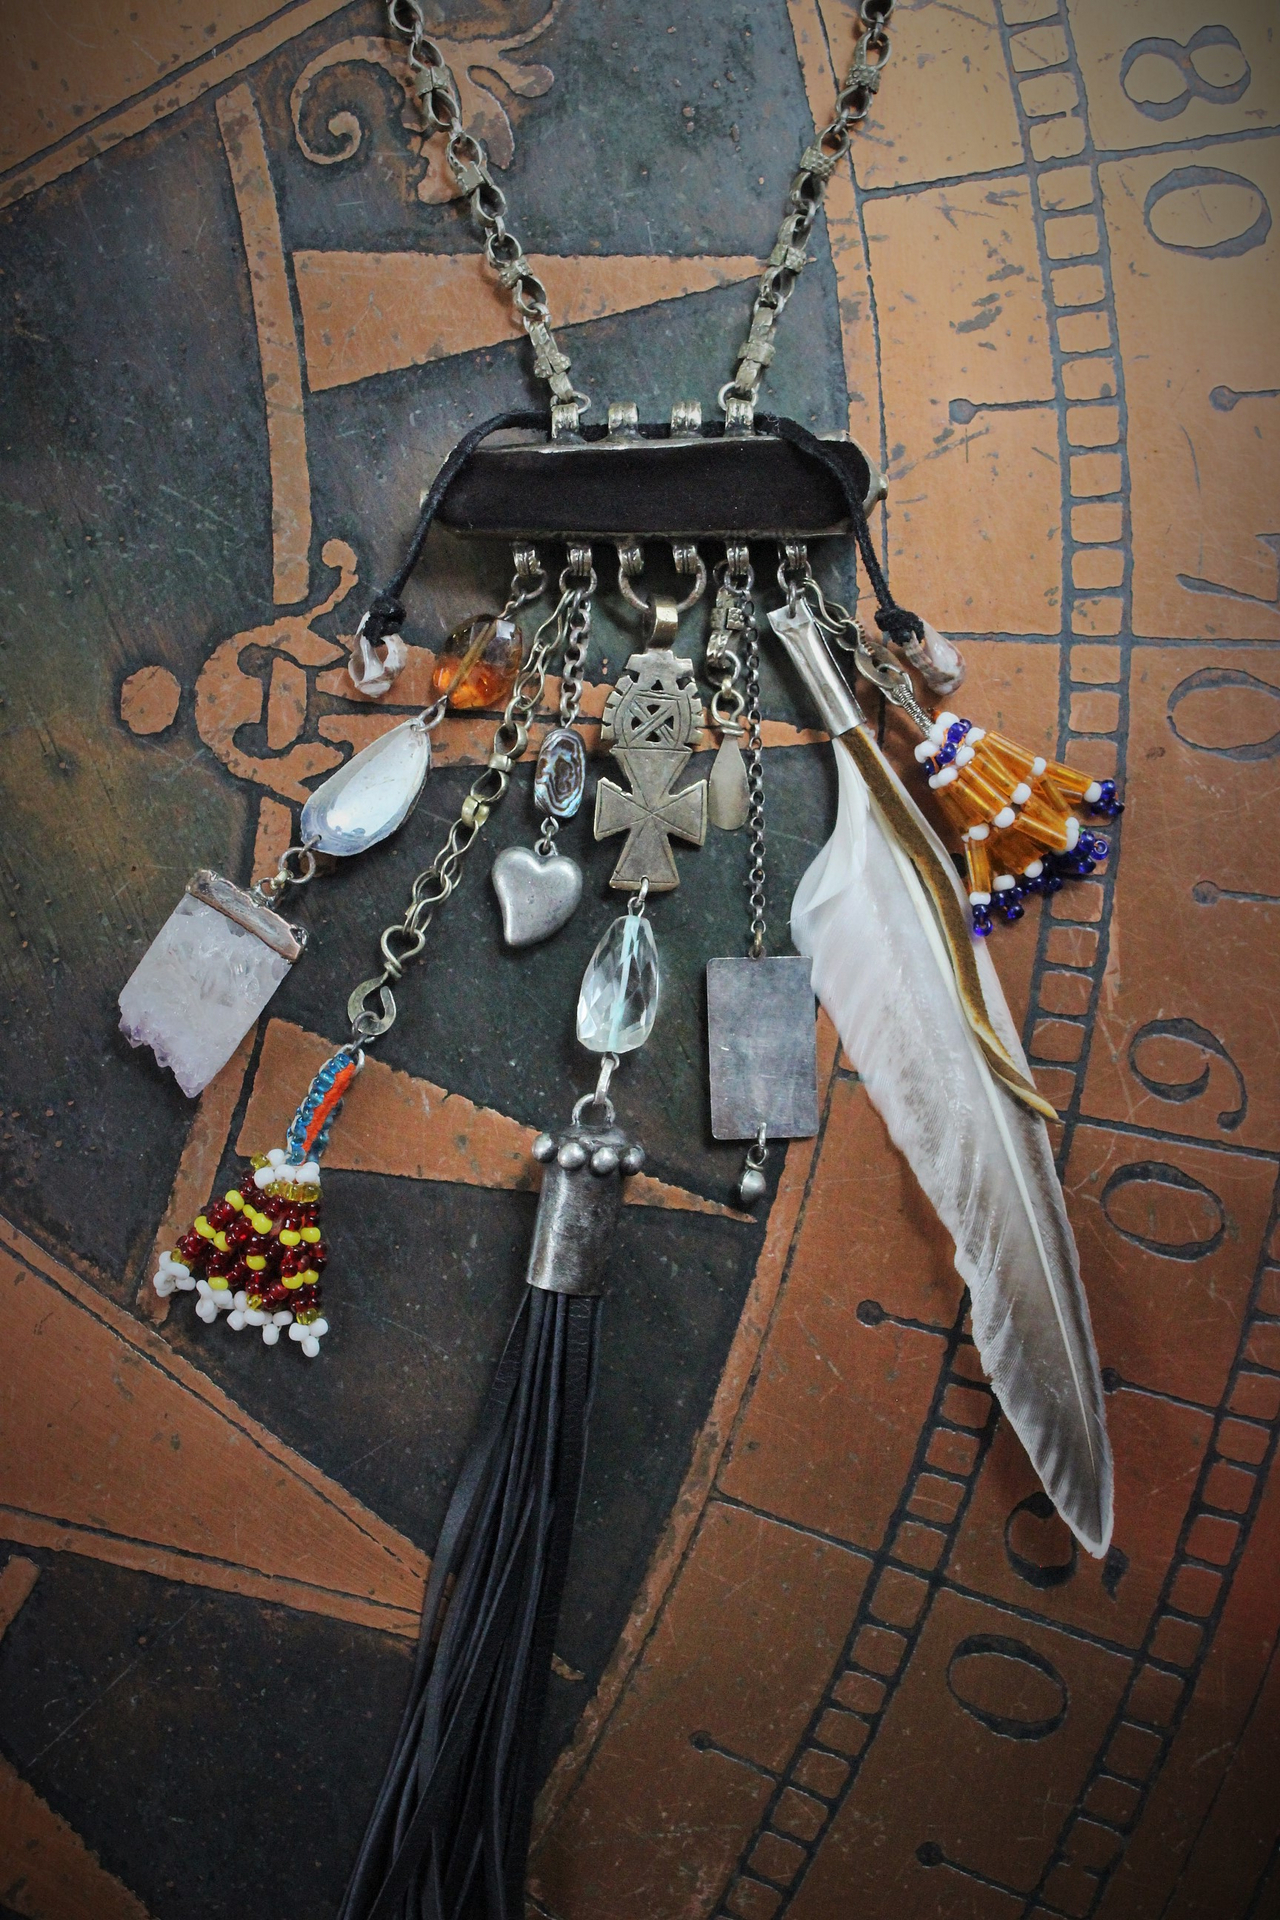 Joy & Pain Necklace w/Antique Gypsy Kuchi Pendant,Sterling Engraved 3 of Swords Tarot Medal,Antique Beaded Banajra Tassels,Faceted Clear Rock Quartz+ More!